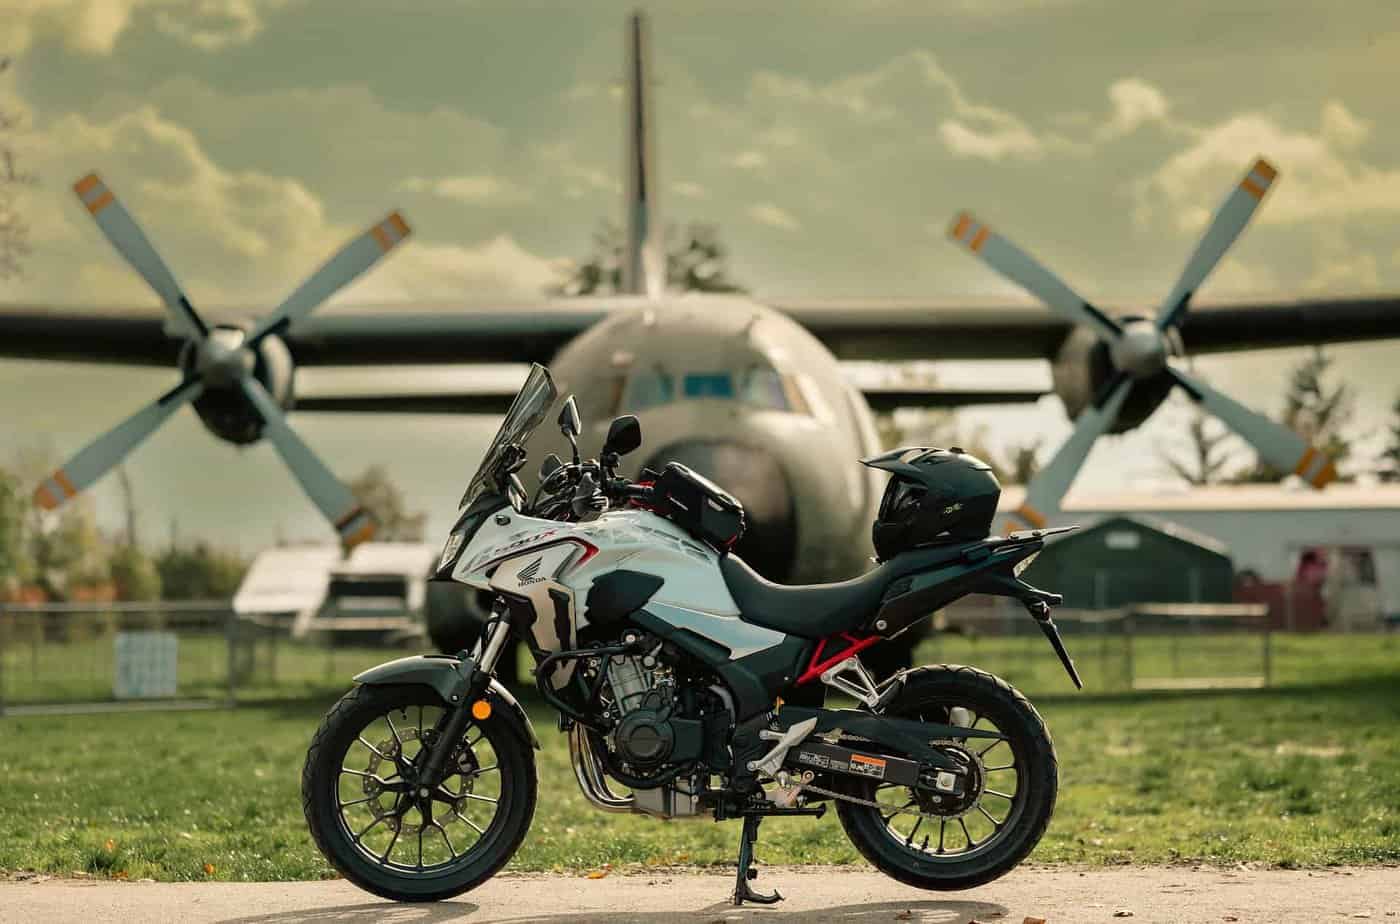 Honda Adventure Bike: 10 motorcycles to conquer the road.